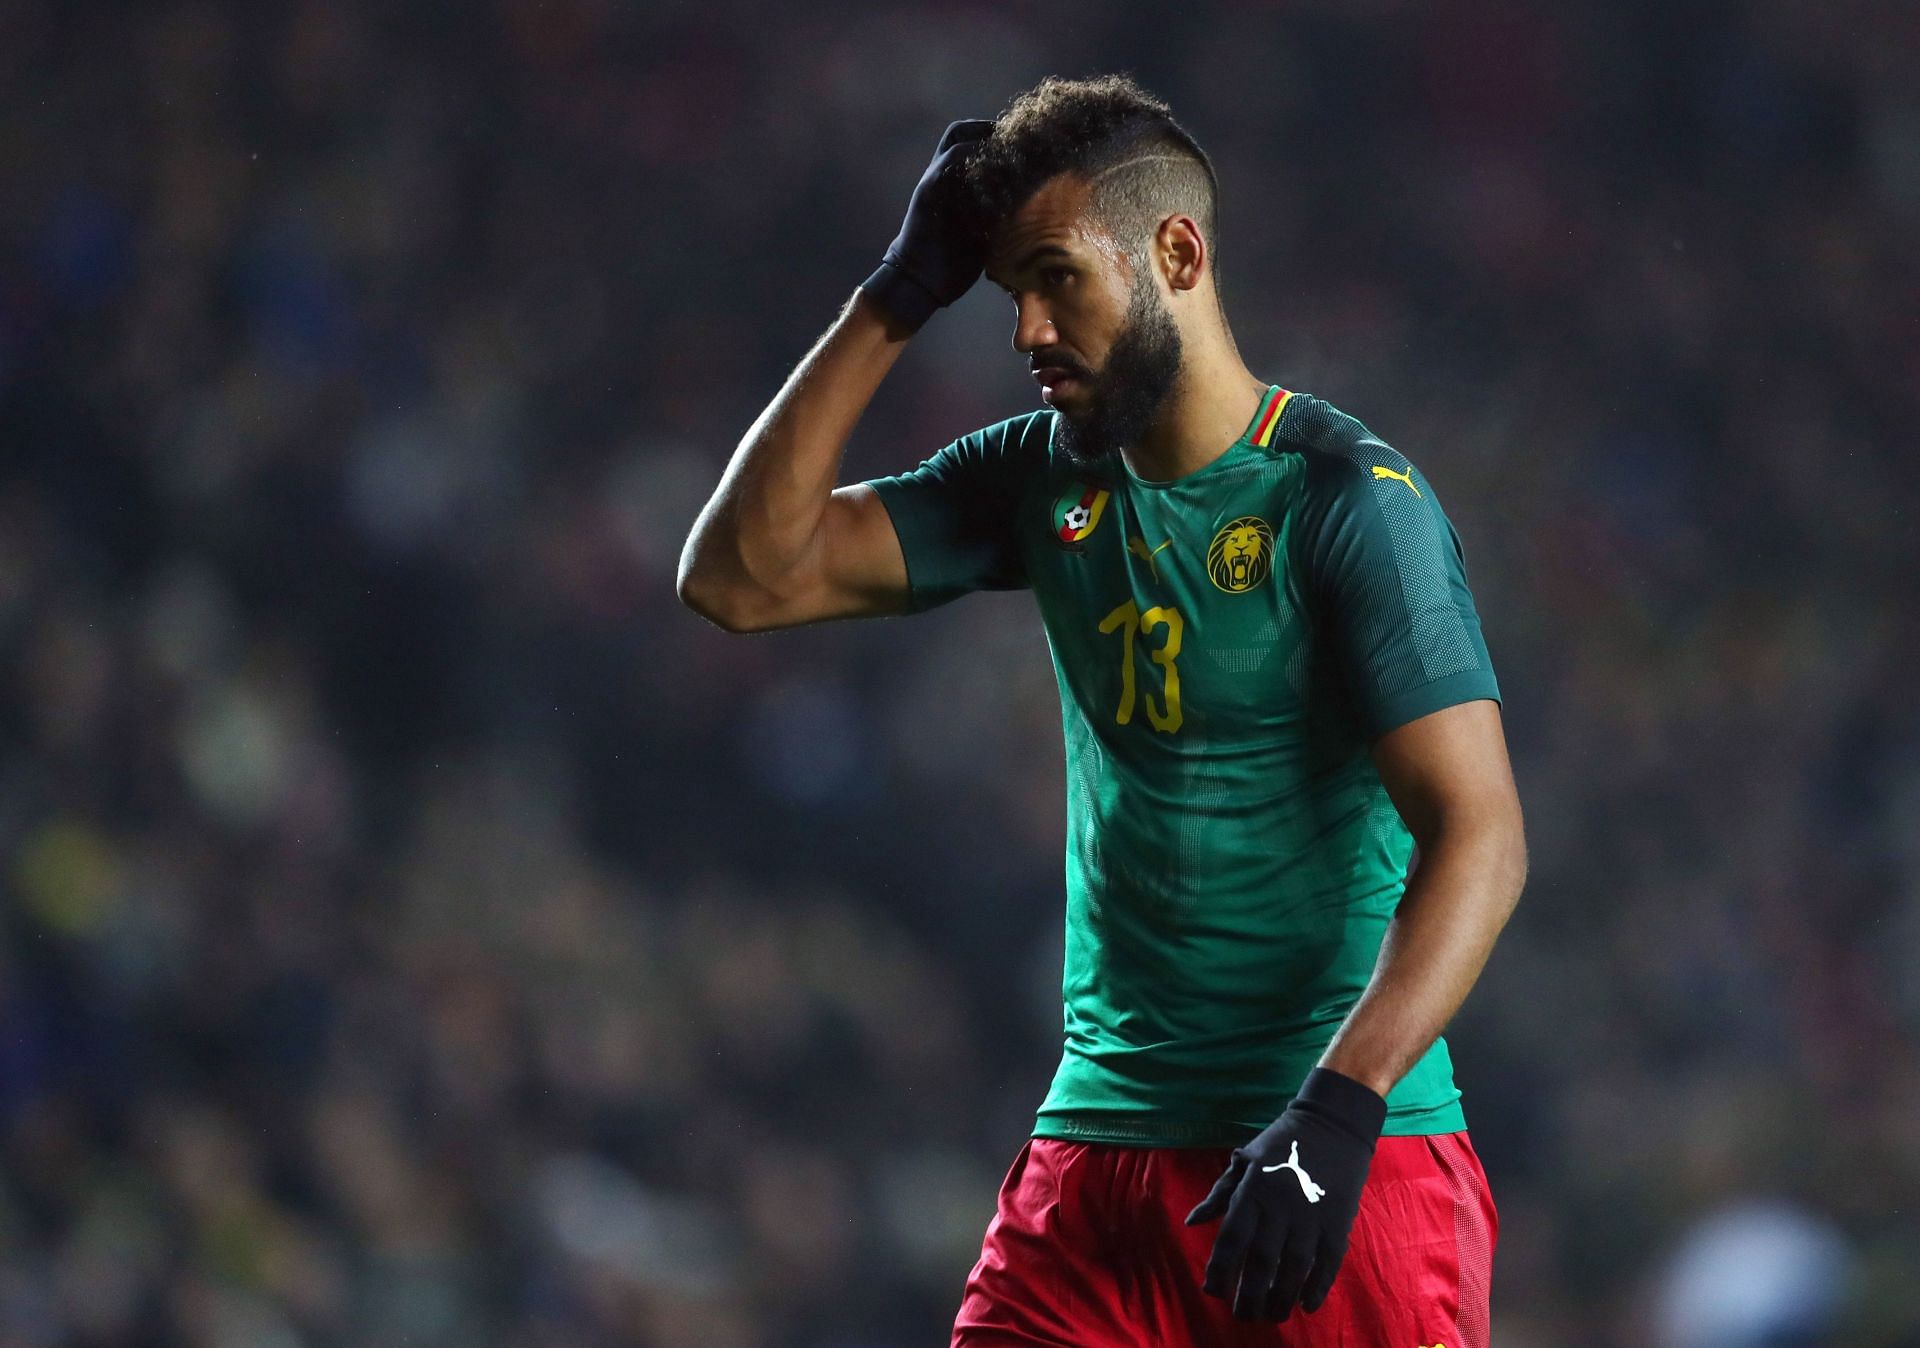 Choupo-Moting will be a huge miss for Cameroon